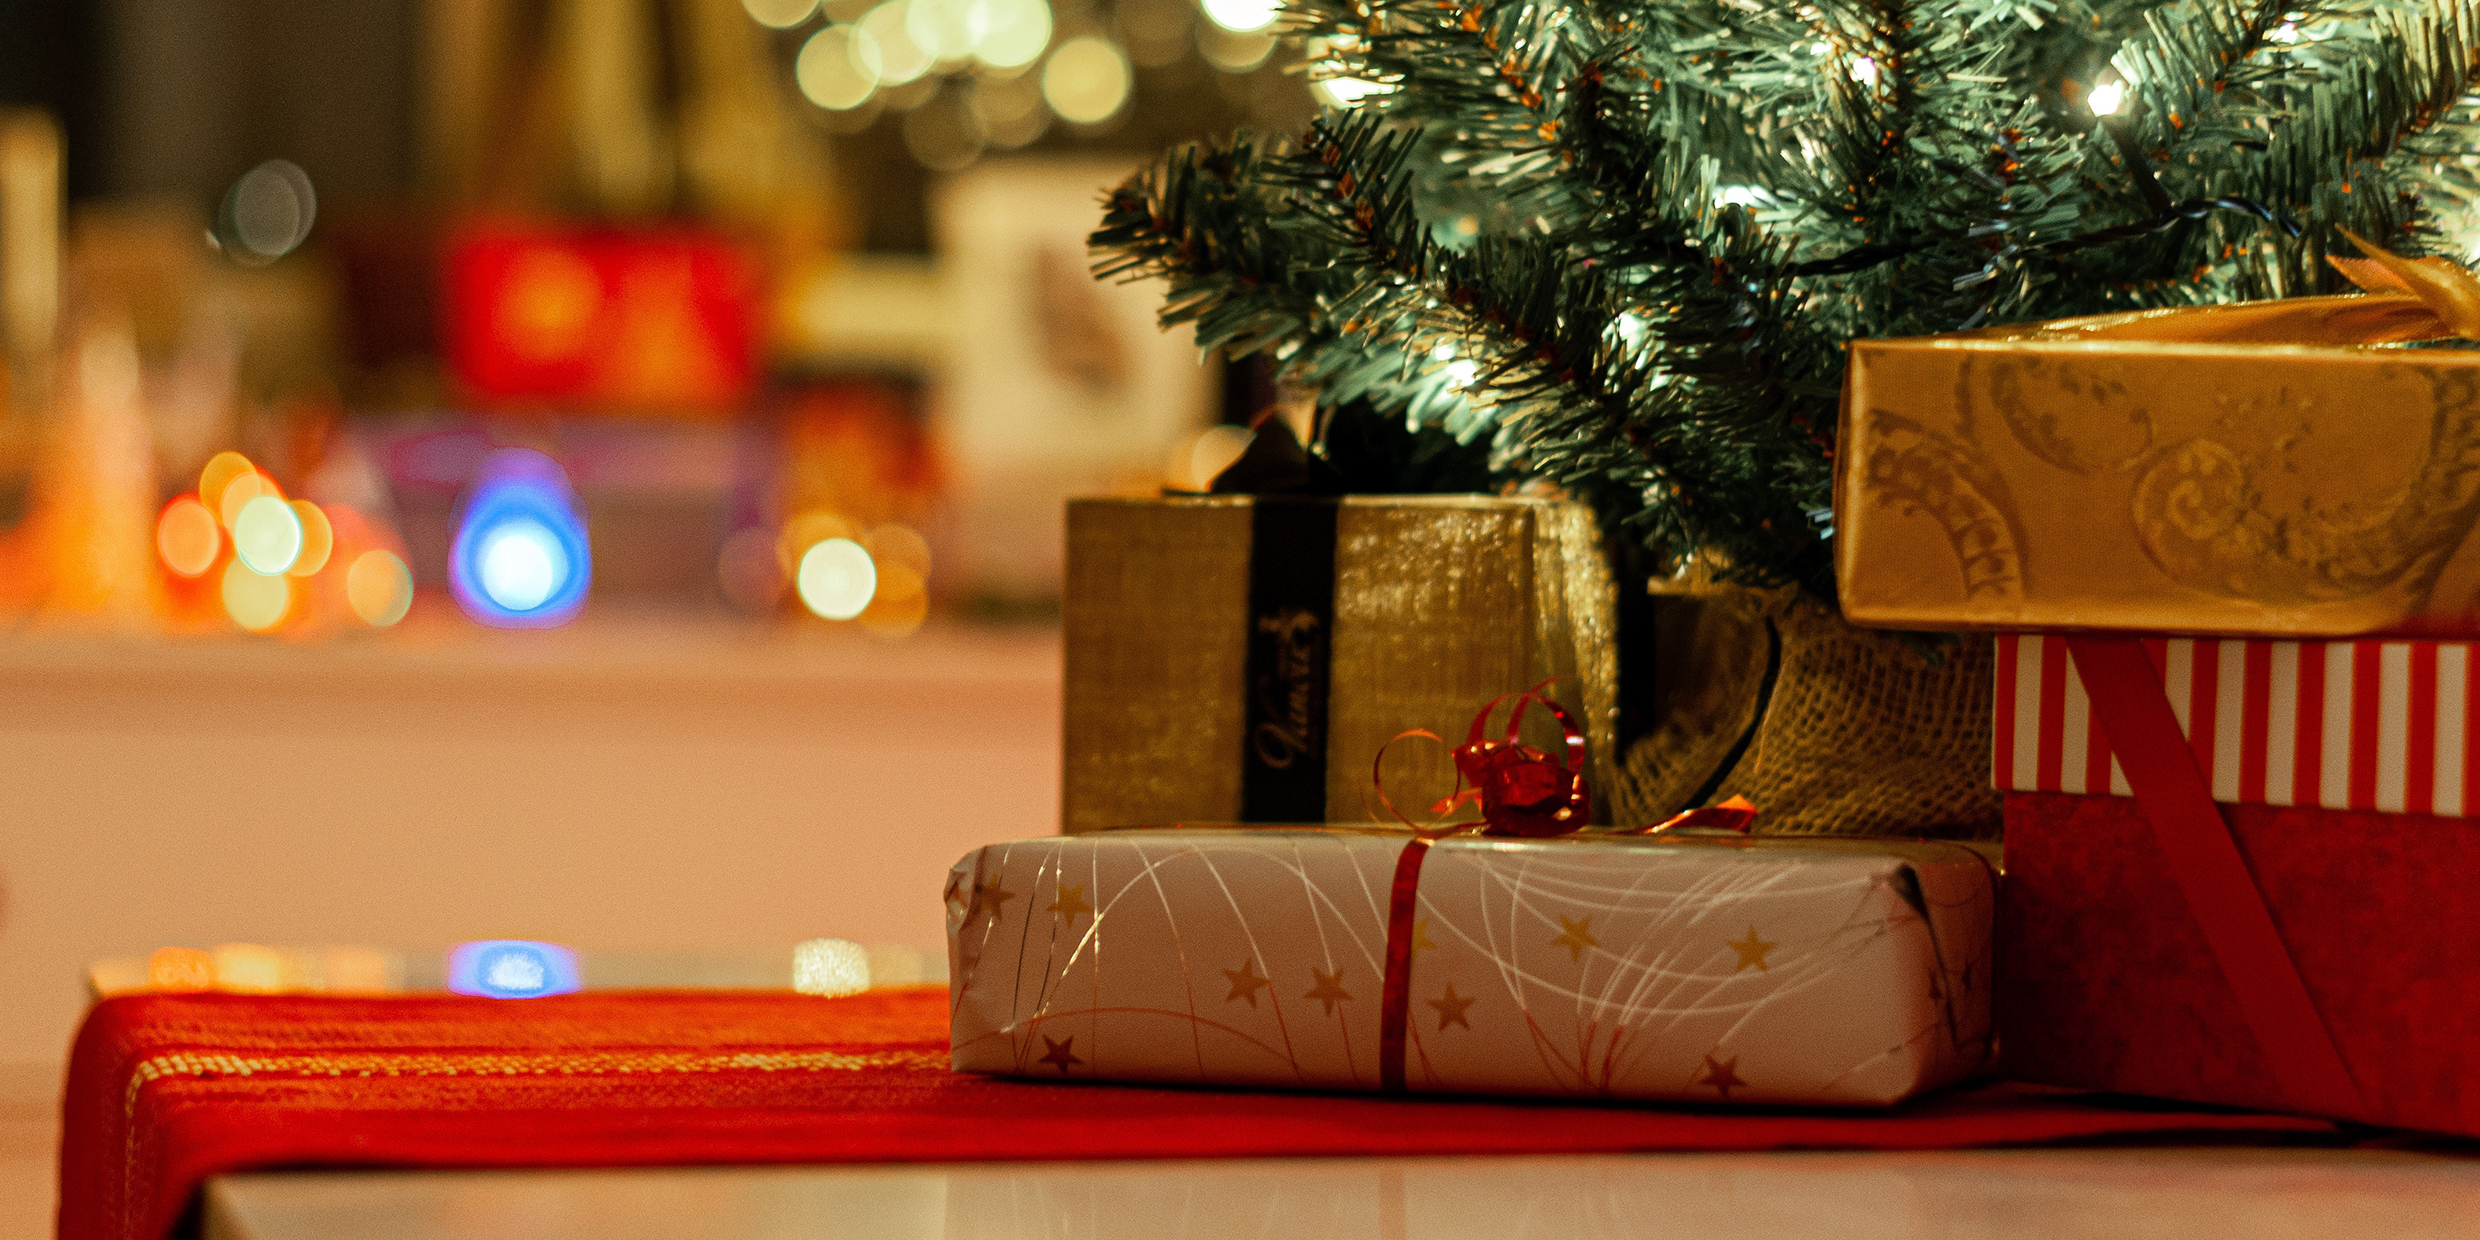 Image of many Christmas presents under tree